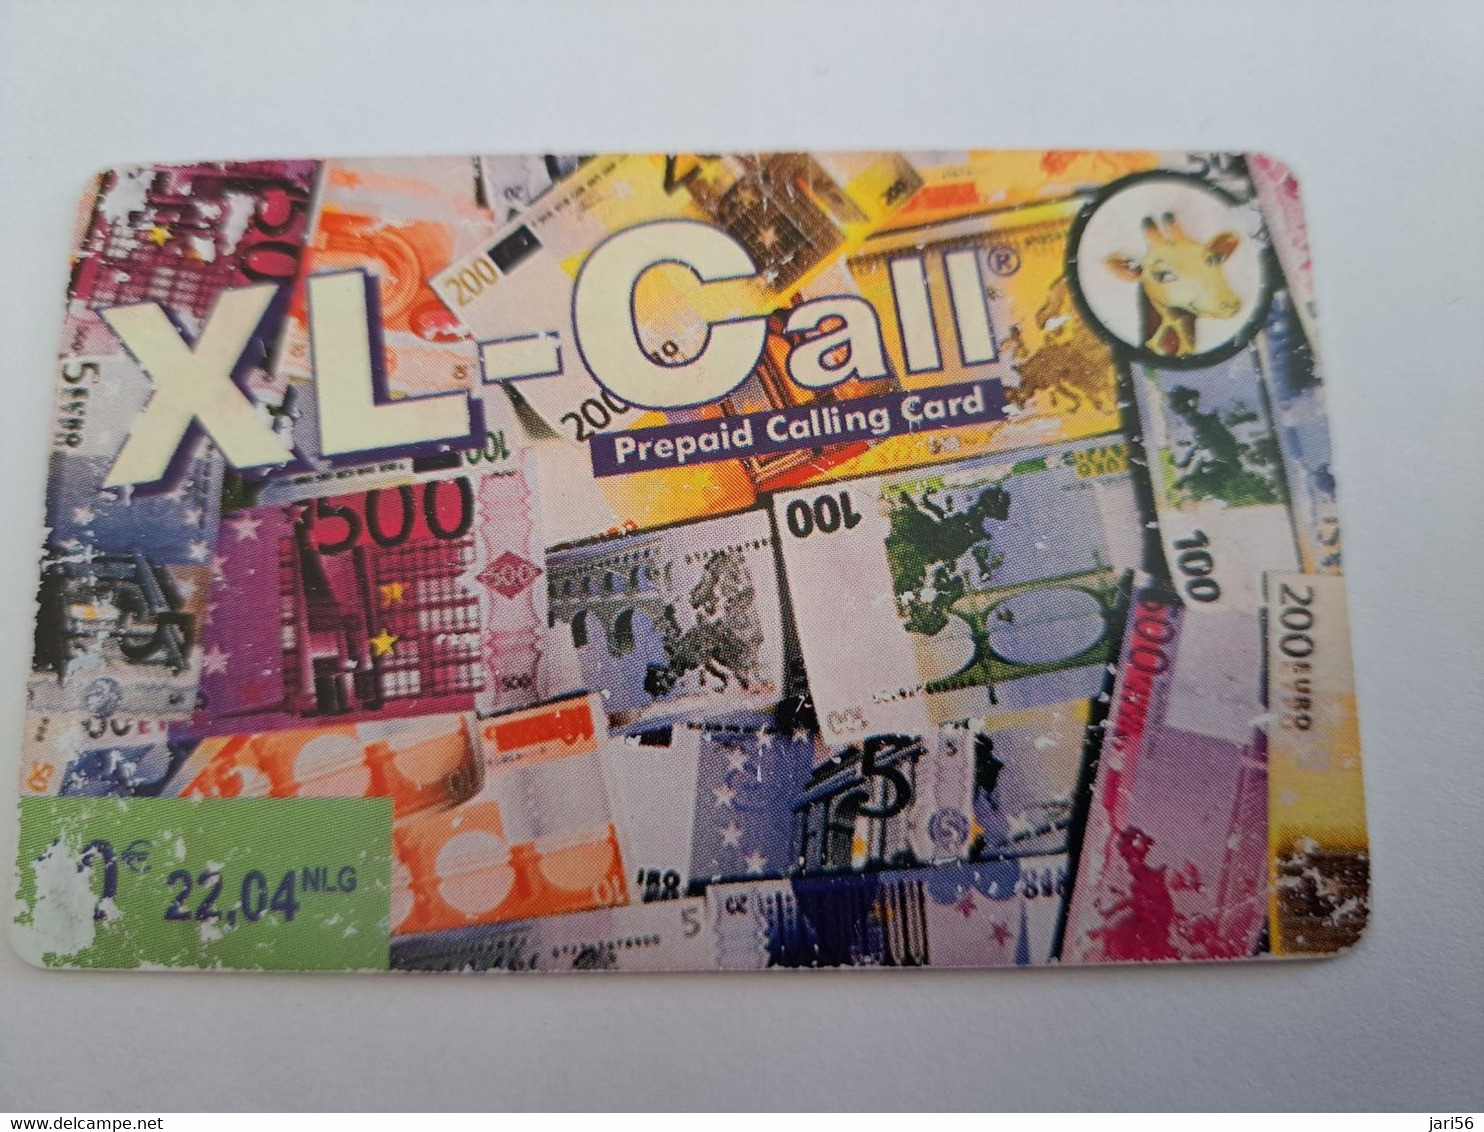 NETHERLANDS  HFL 10,-  XL-CALL  /BANKNOTES(USER MARKS VISIBLE !!! )     / OLDER CARD    PREPAID  Nice Used  ** 11214** - [3] Sim Cards, Prepaid & Refills